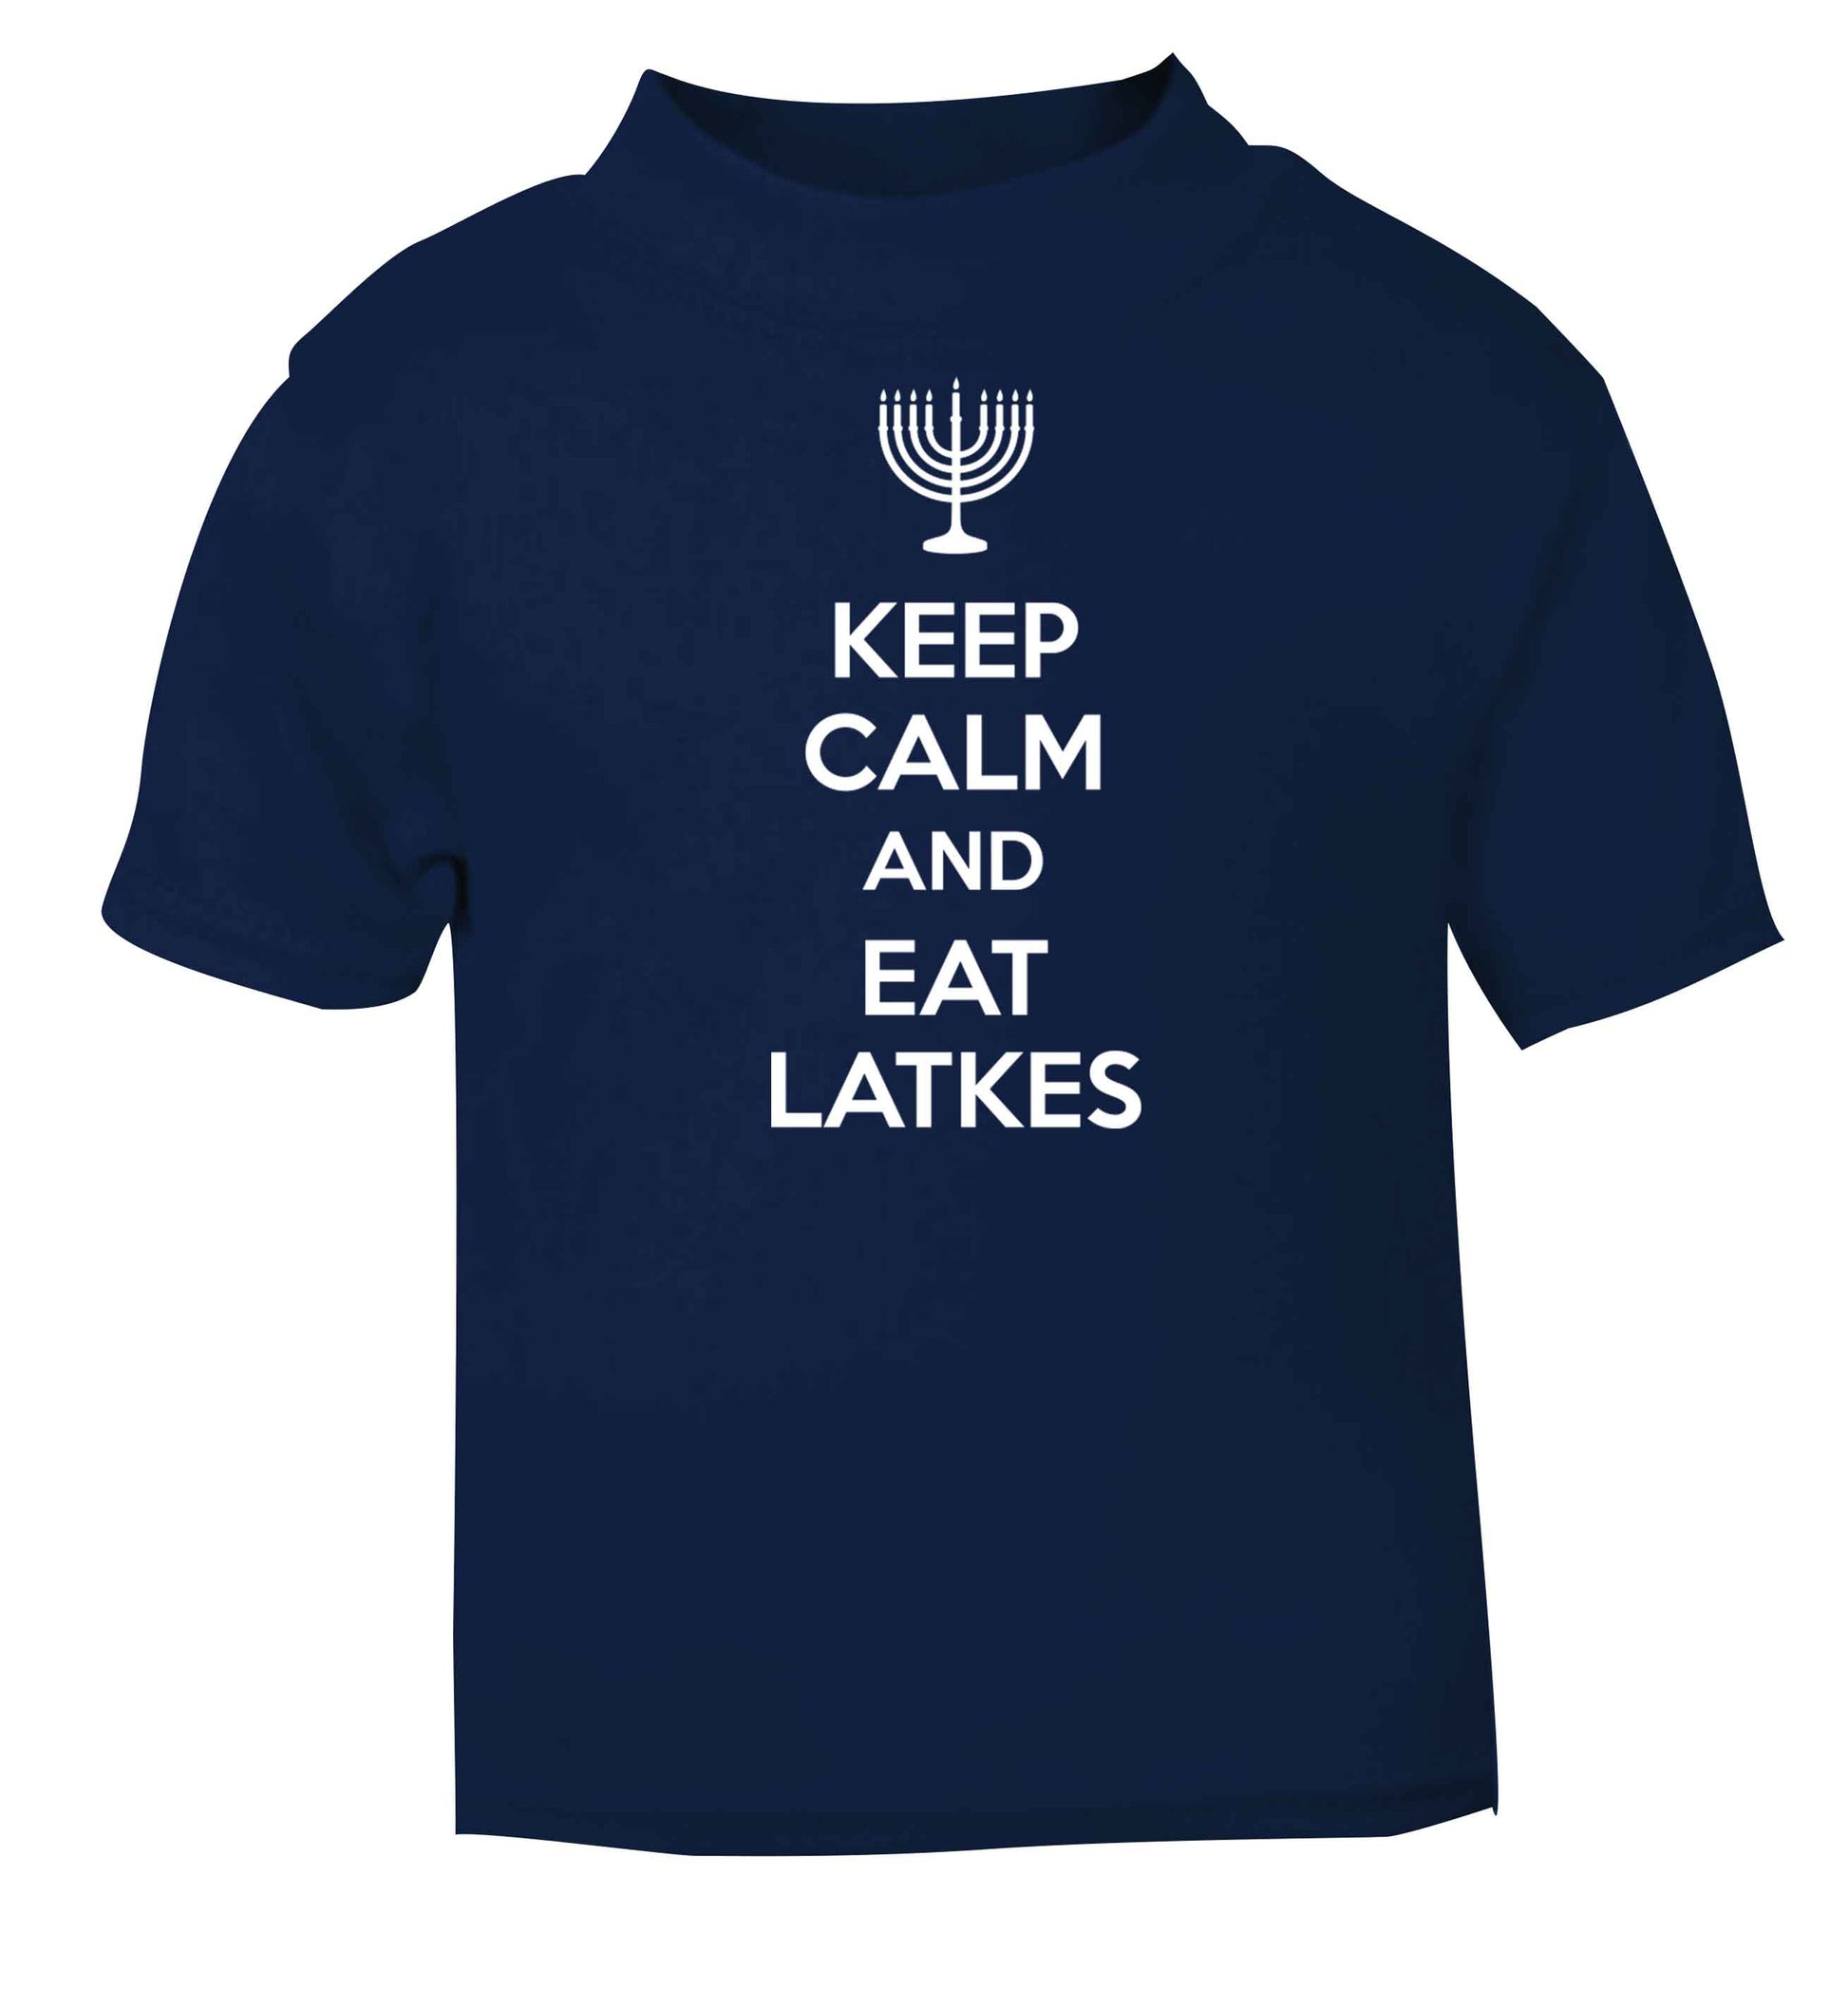 Keep calm and eat latkes navy baby toddler Tshirt 2 Years